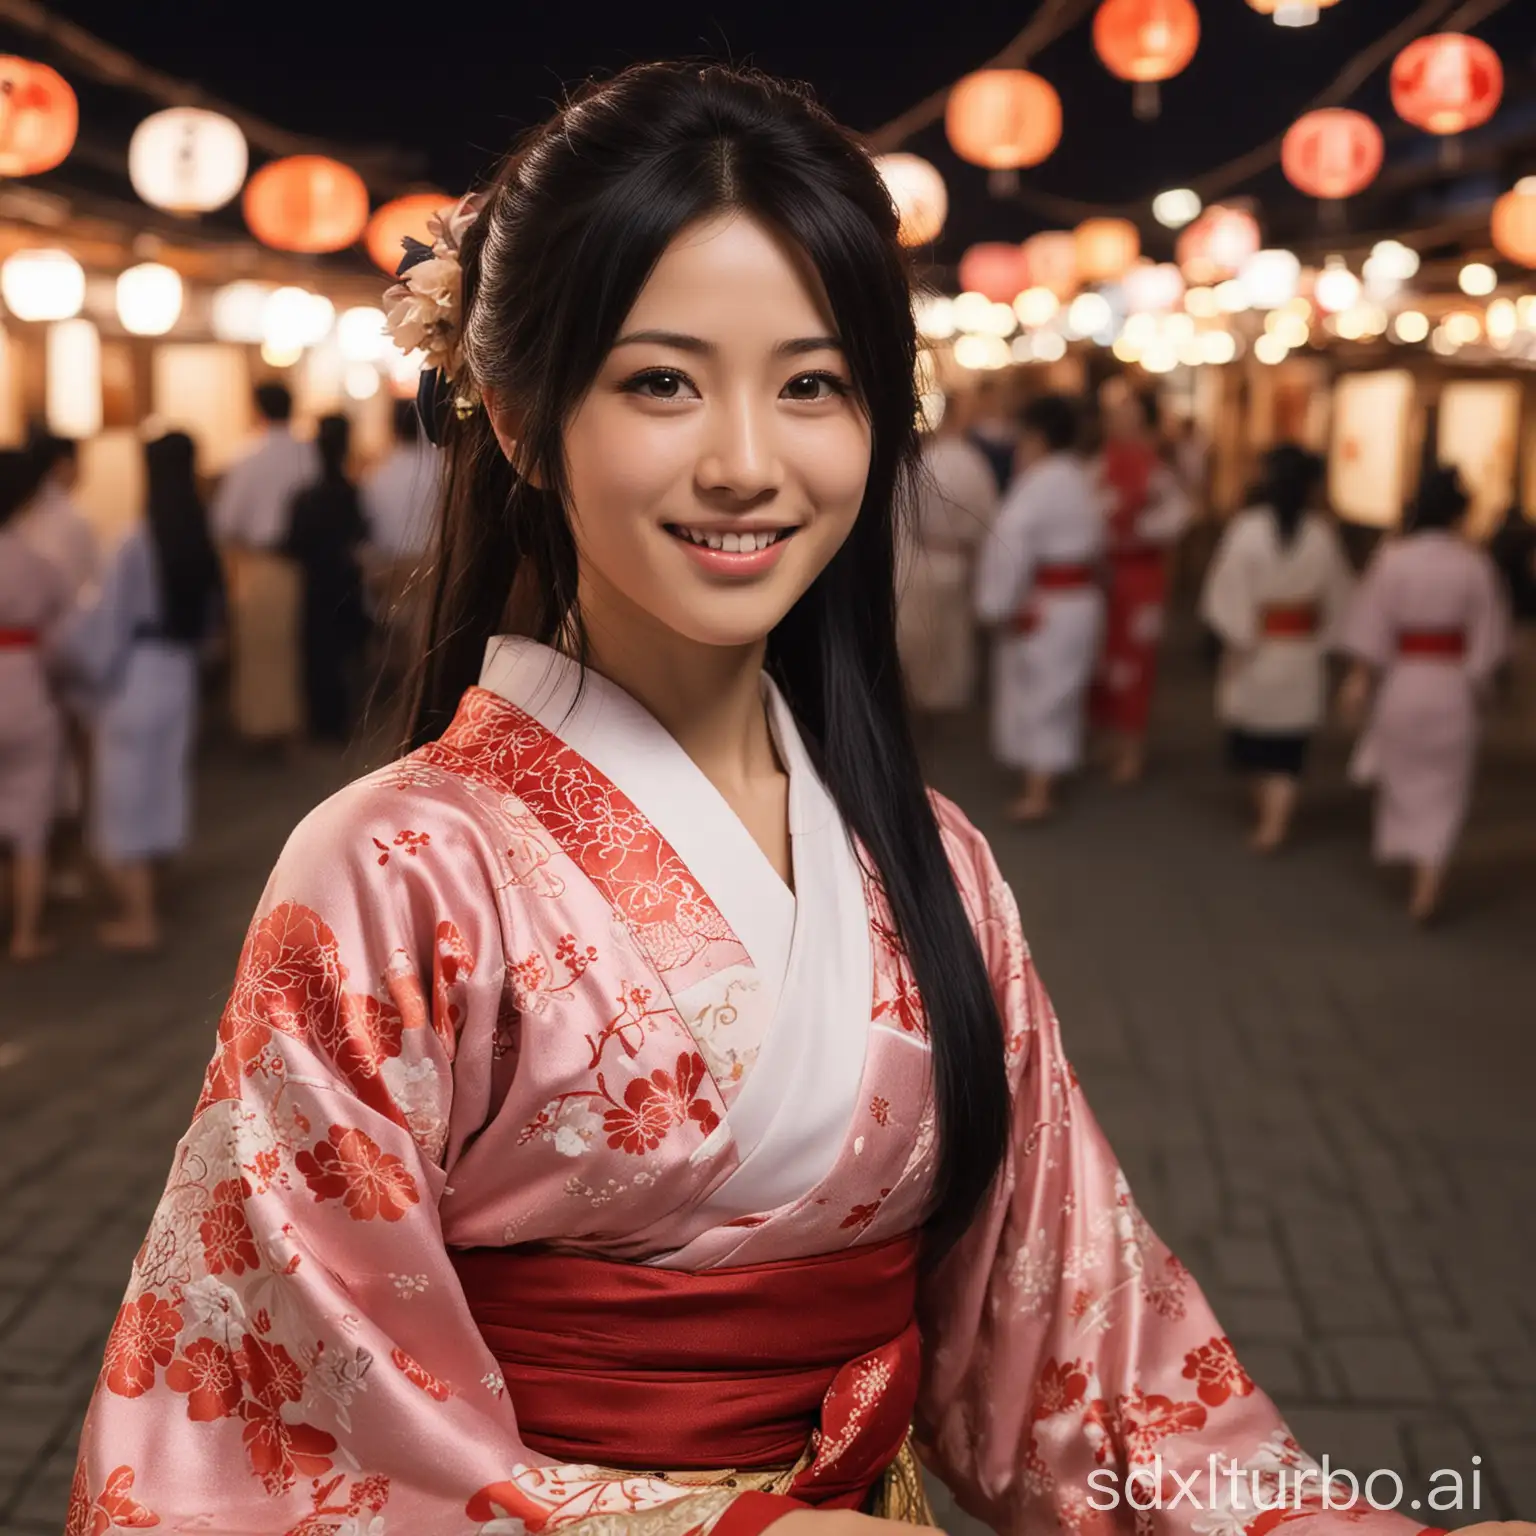  "Generate an image of Akira Hoshino, age 25, with long straight black hair, dark brown eyes, and a beautiful smile, dressed up in japanese outfit, having fun and laughter playing kingyo-sukui during summer festival. It is a night scene"